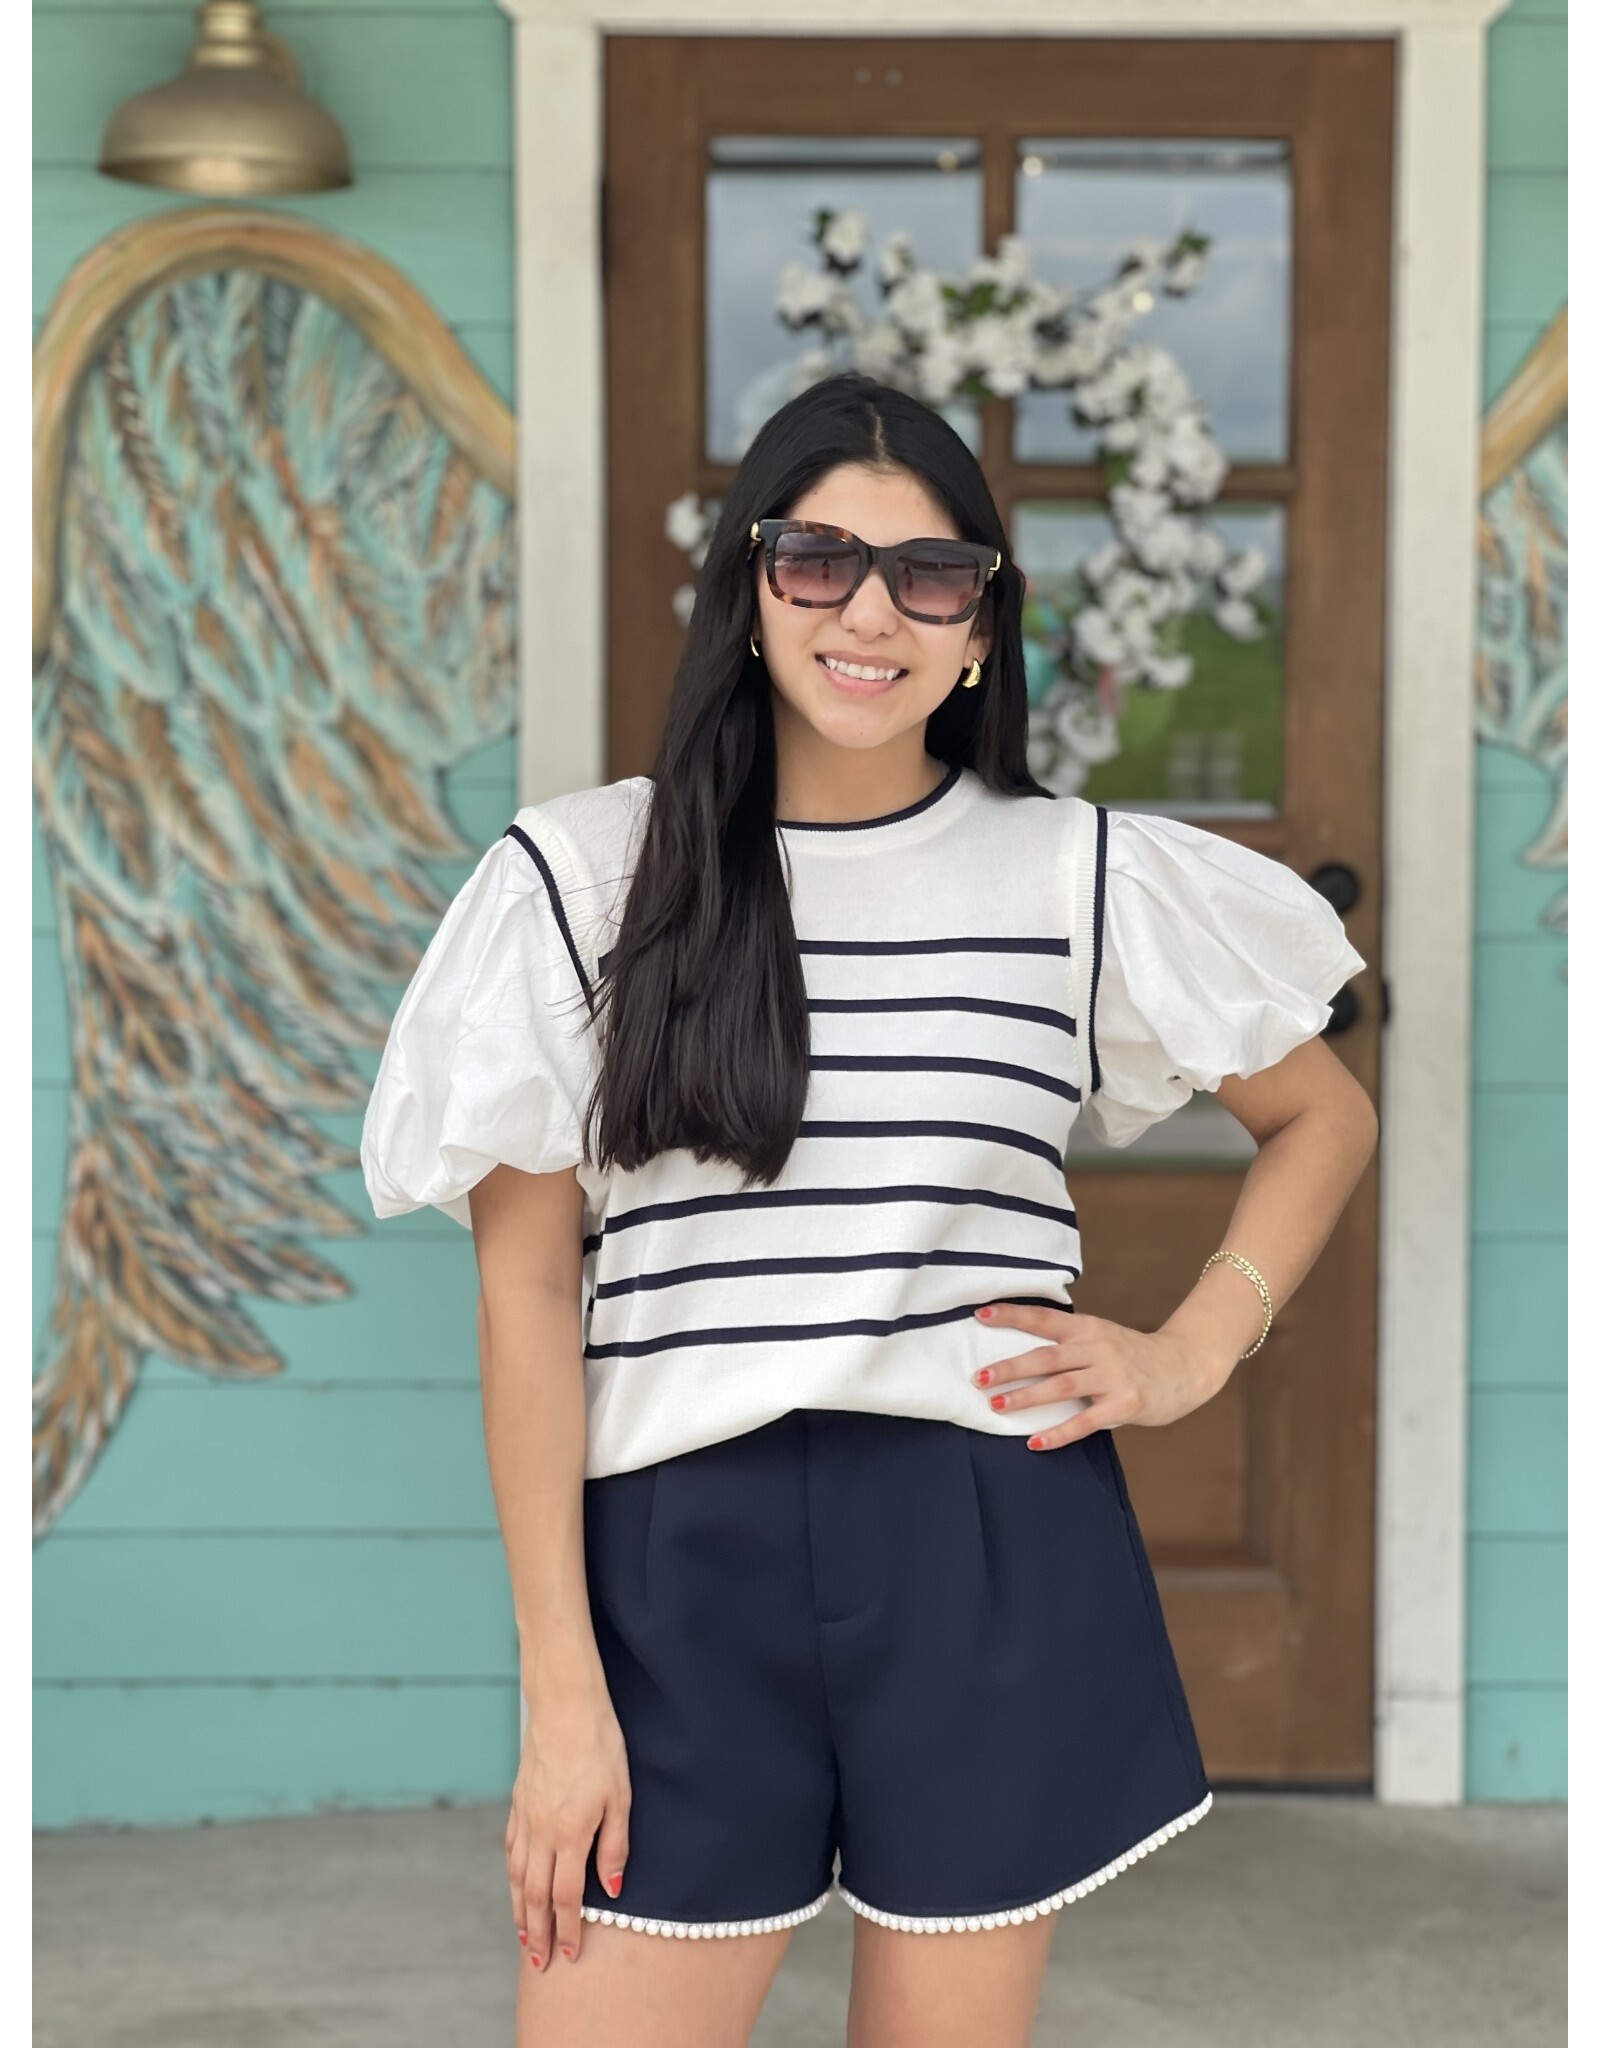 Navy Striped Puff Sleeve Knit Top